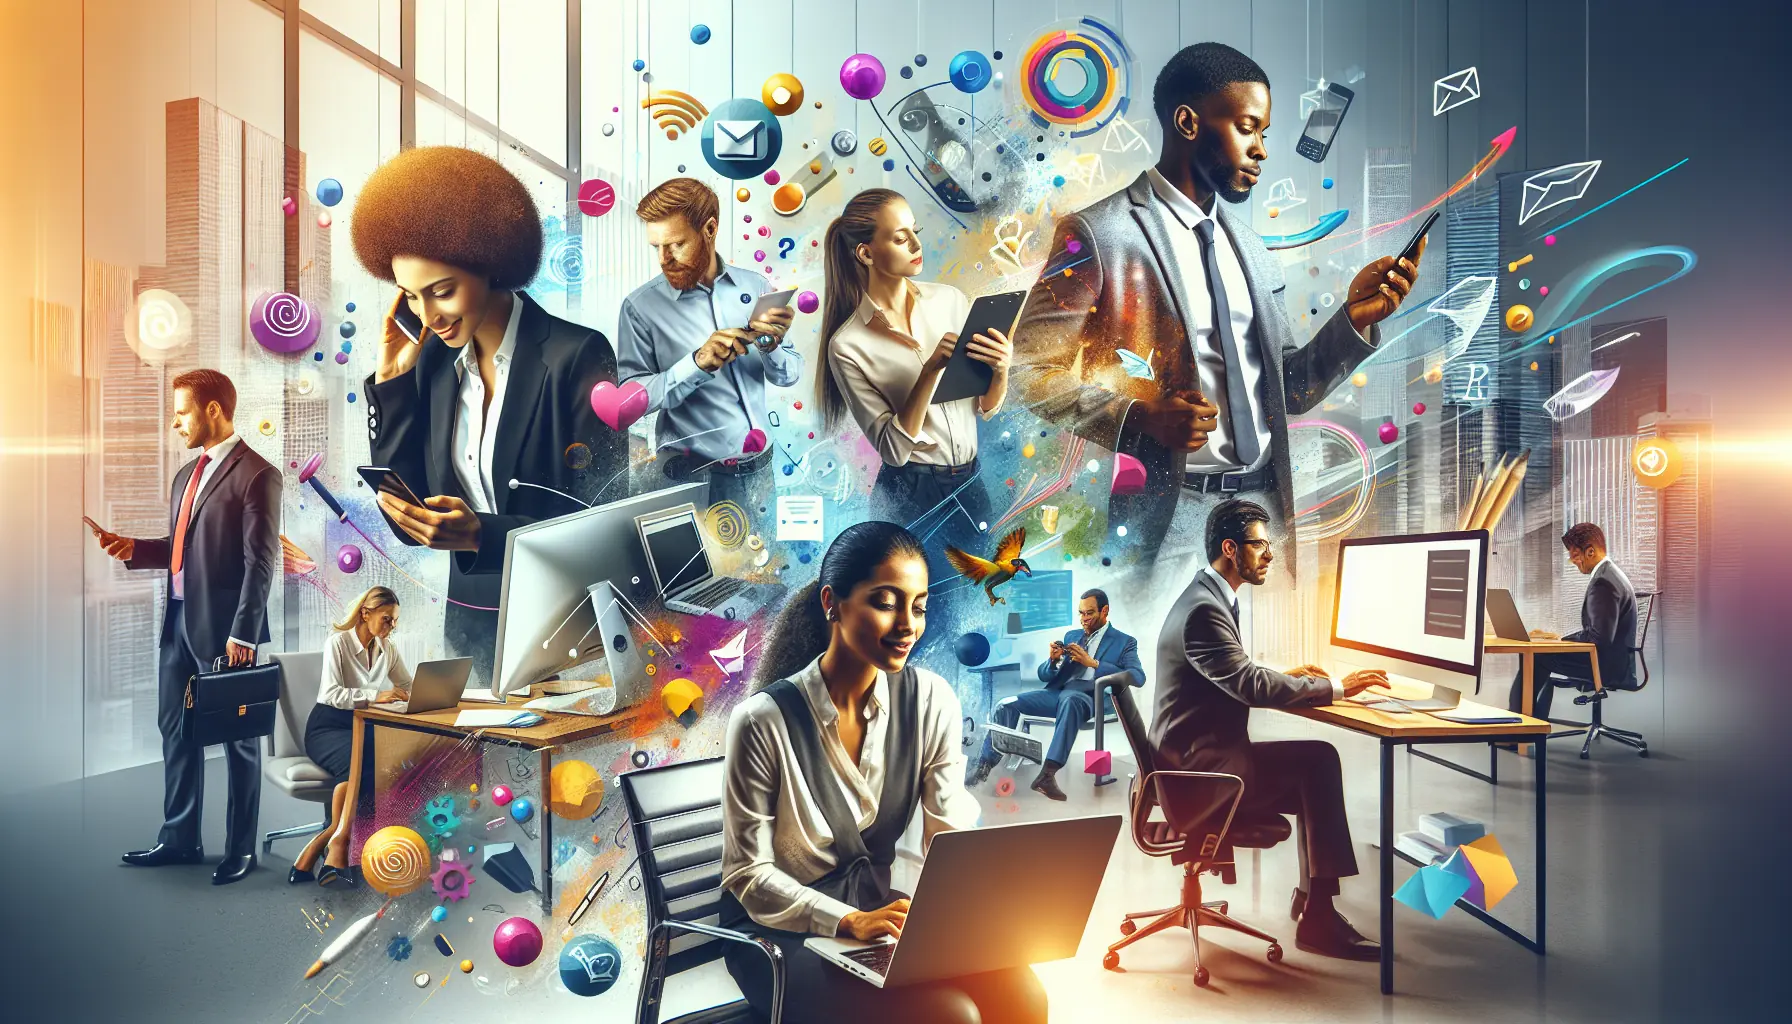 An artistic digital collage depicting a bustling modern office with diverse professionals using smartphones and computers to engage with a variety of leading SMS marketing tools, highlighted by icons